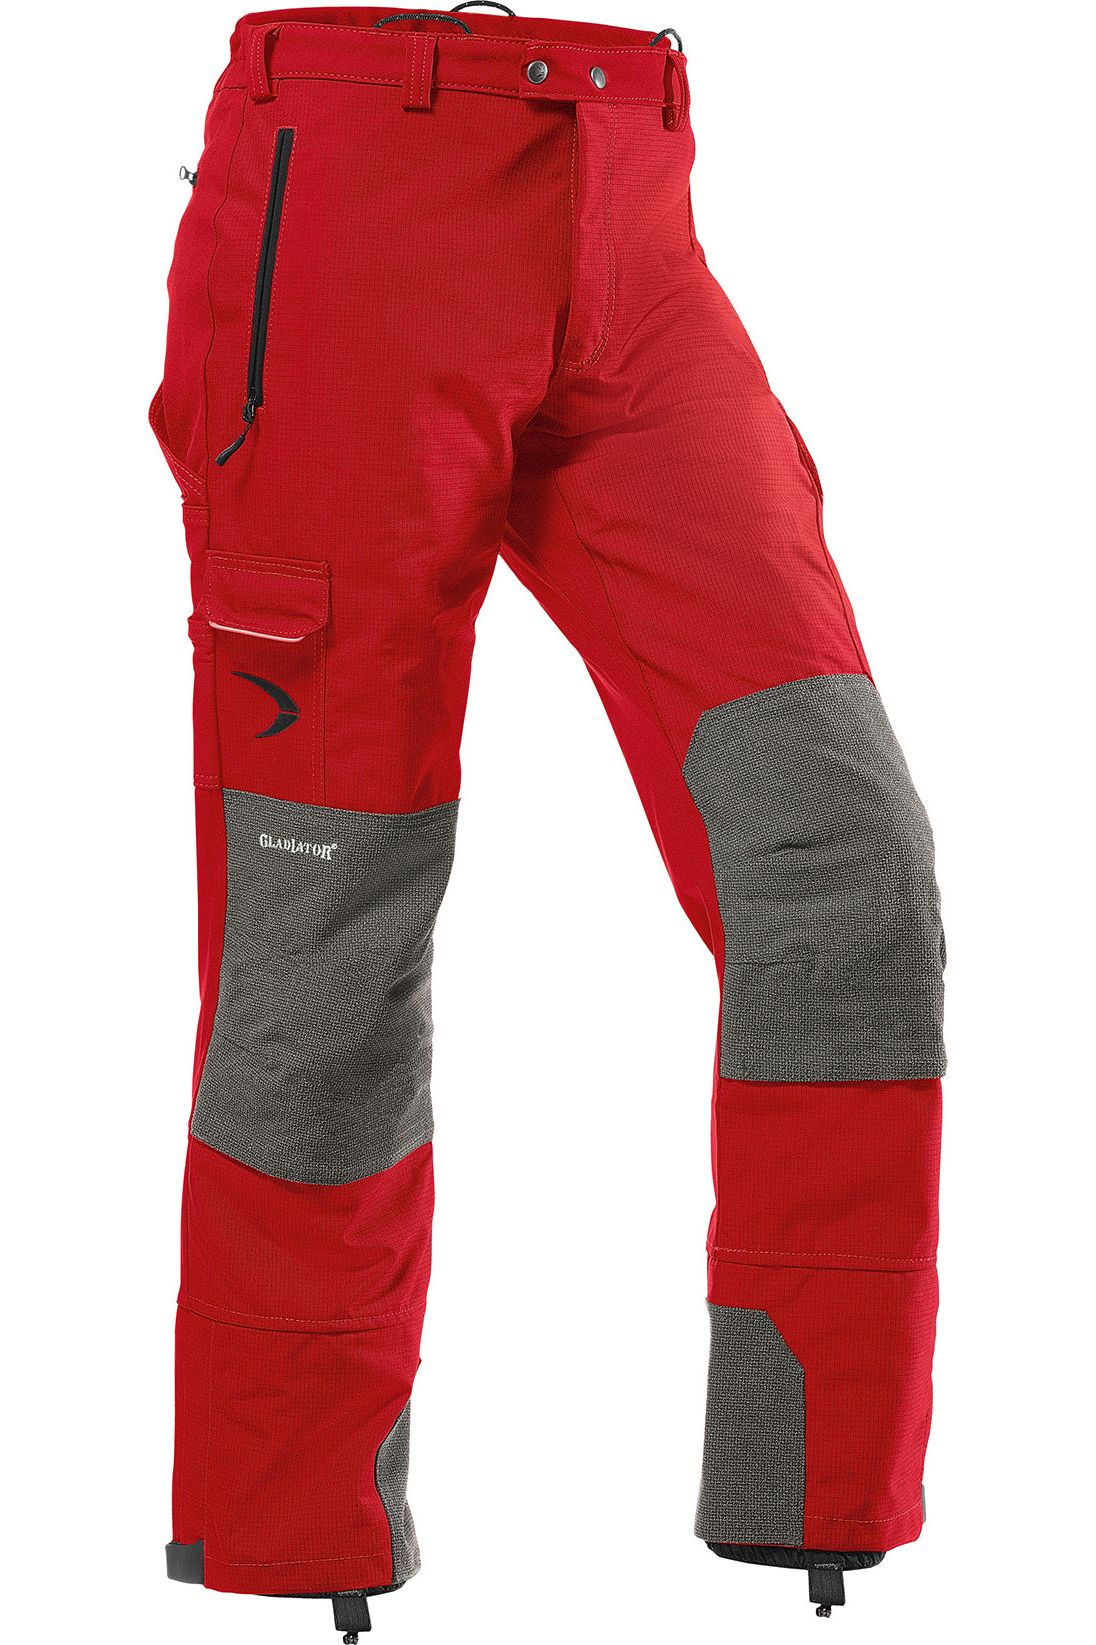 Pfanner Loden Outdoor Trousers, Pfanner Outdoor